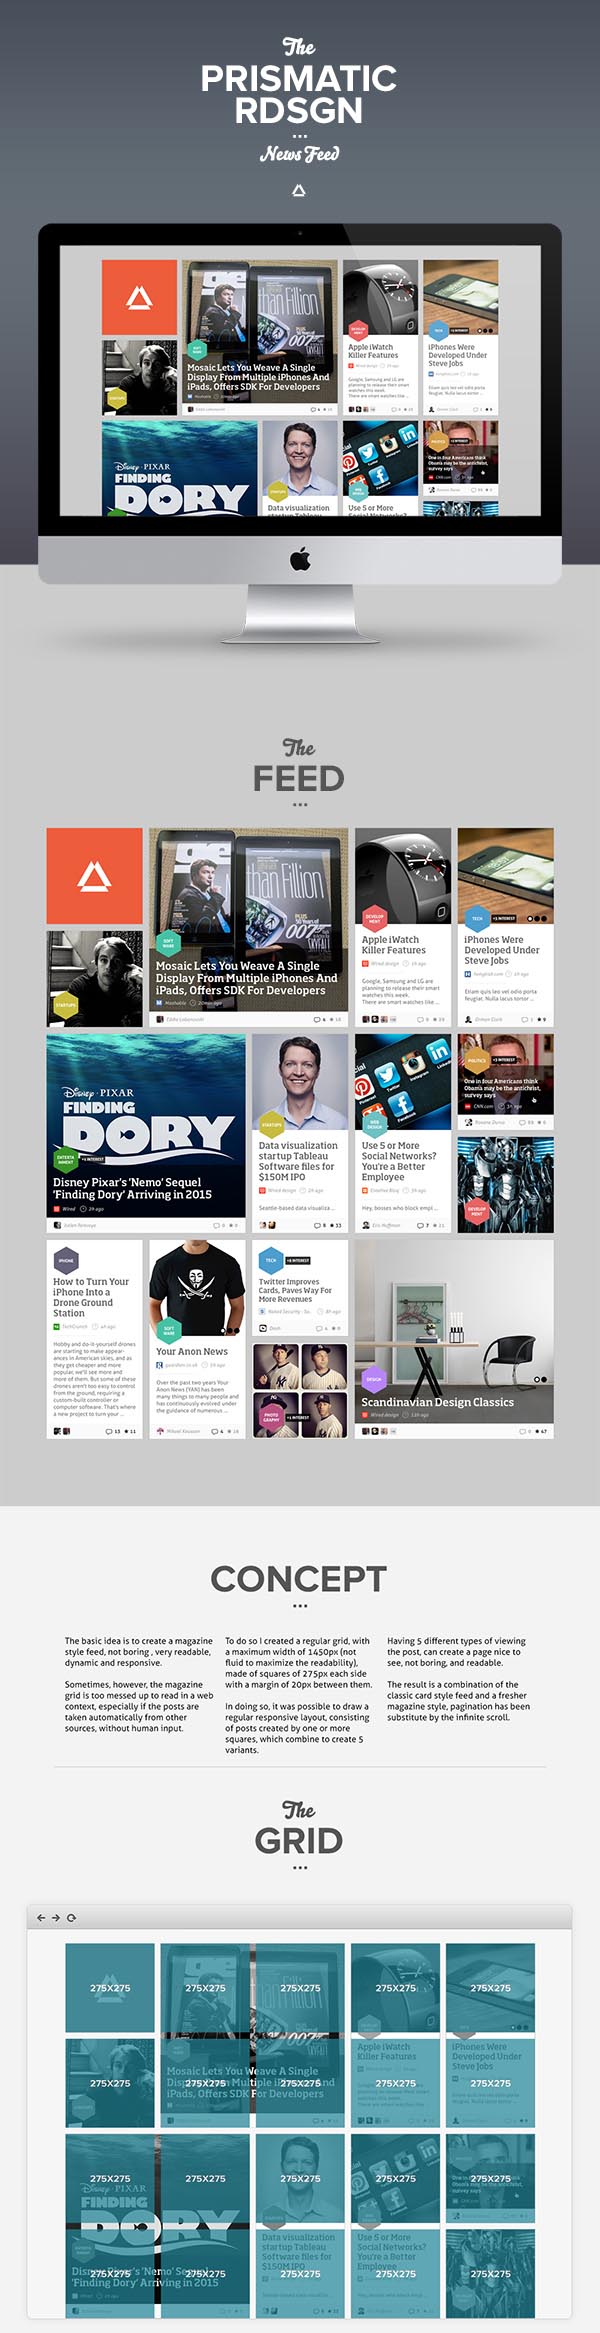 Prismatic - Web Design Concept for News Feed